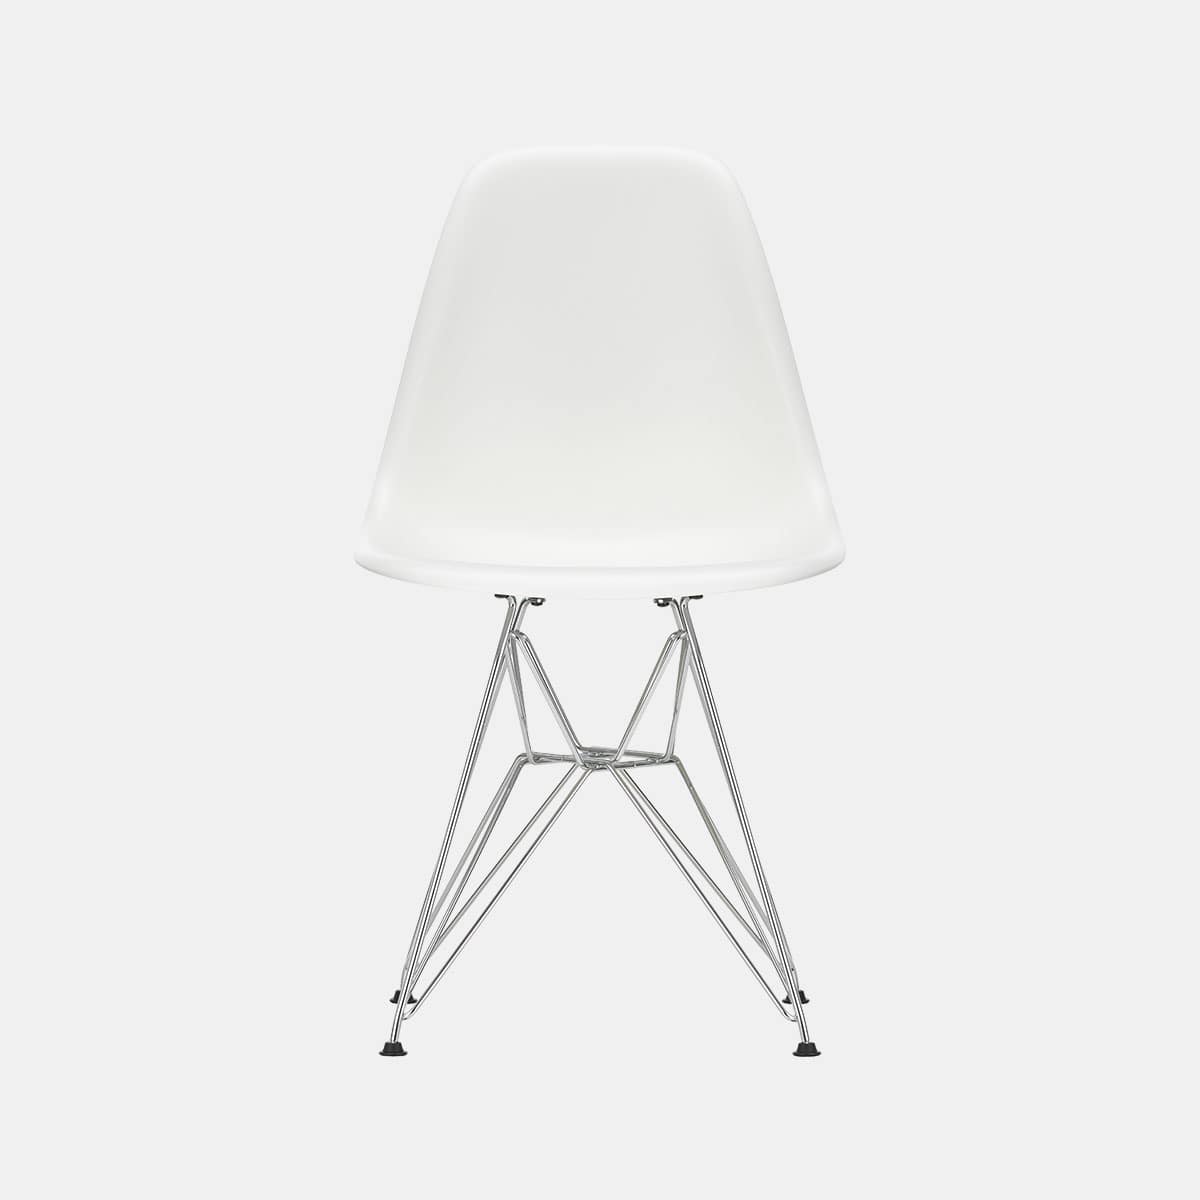 vitra-charles-ray-eames-plastic-side-chair-dsr-wit-chroom-001shop